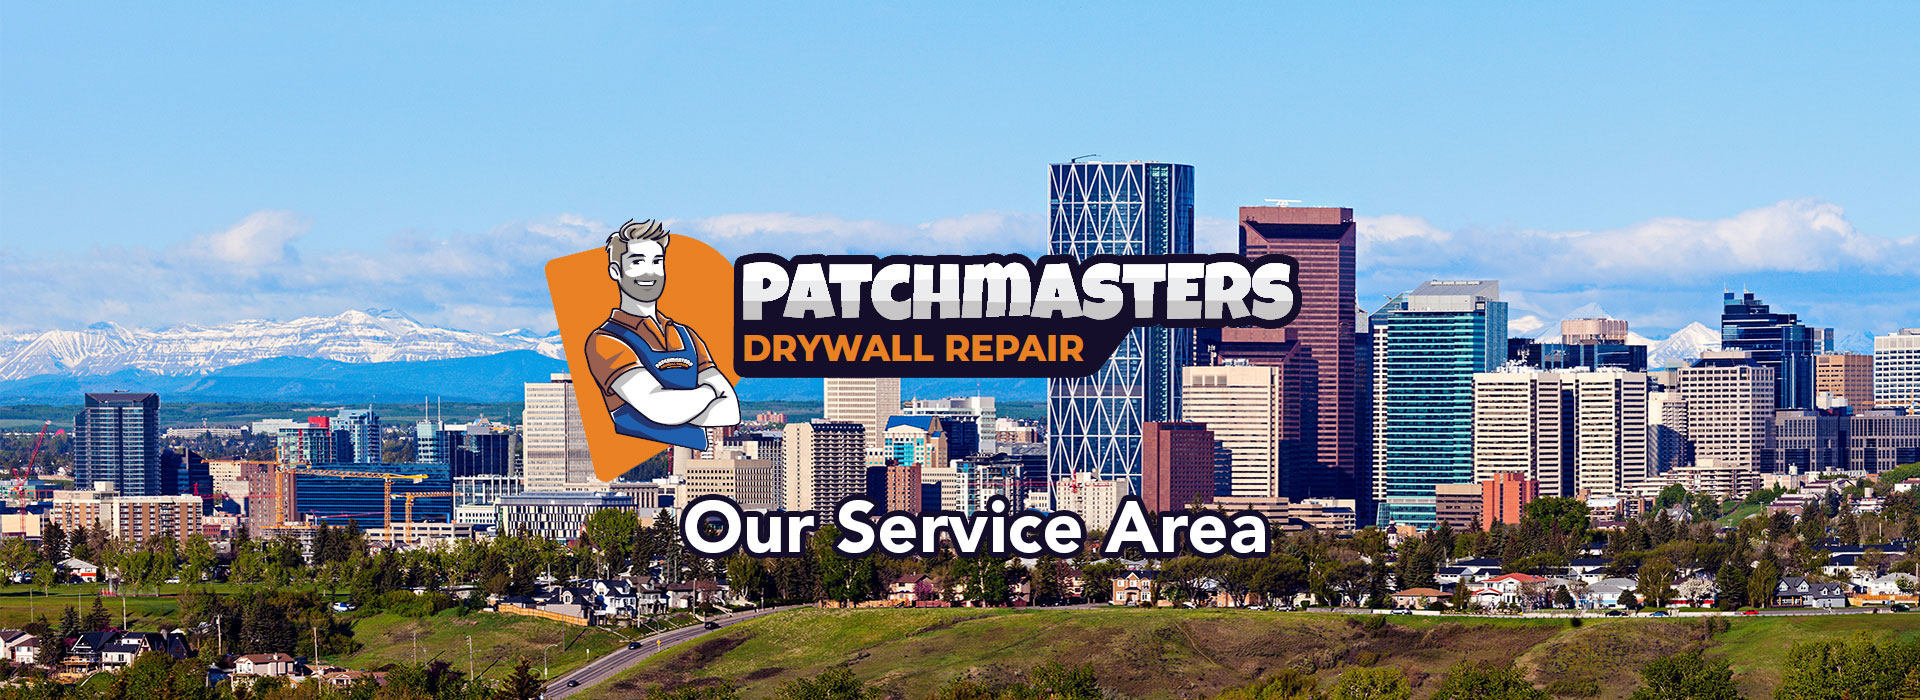 Need drywall repair or other services?  No job is too small (or too big) for Patchmasters!